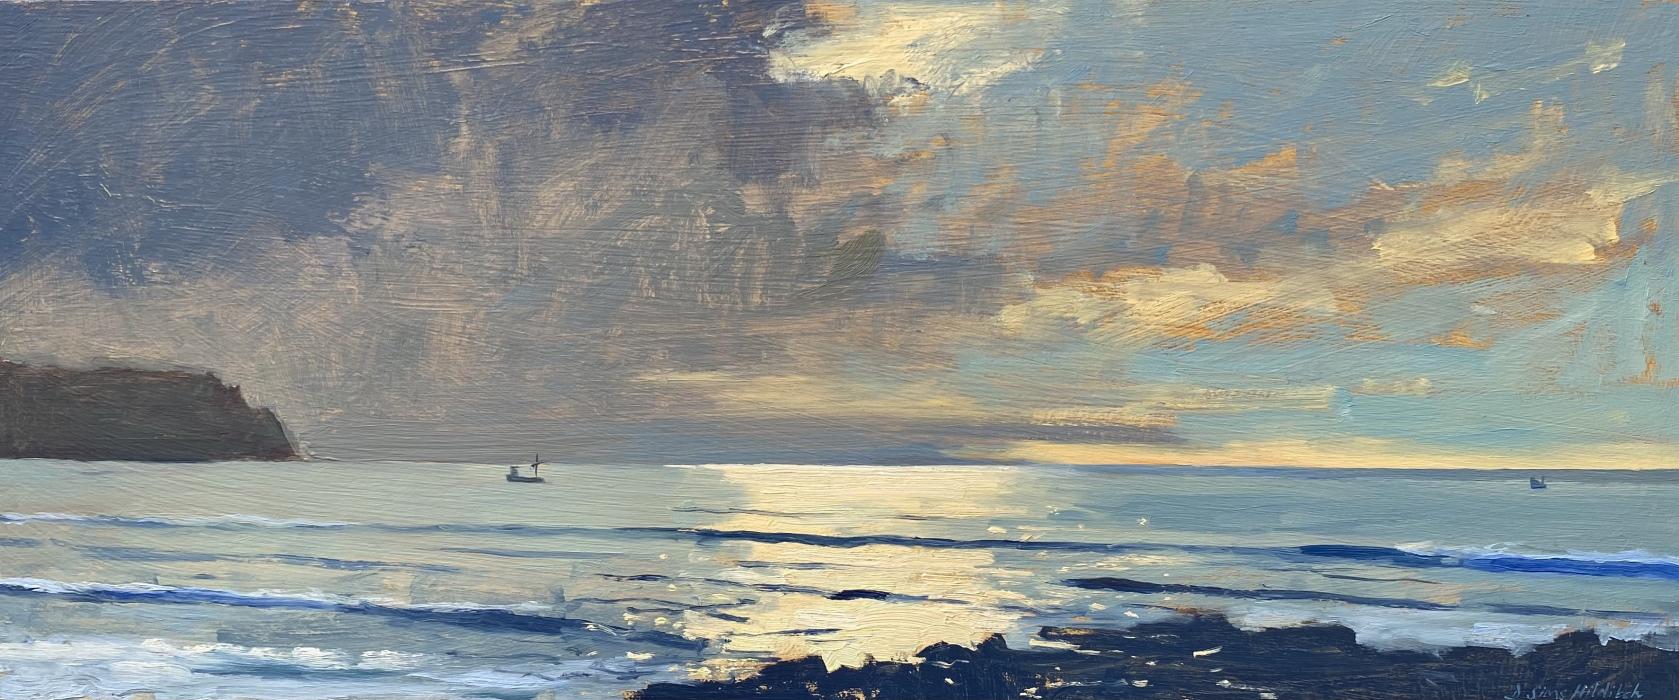 Early morning light Impression with fishing boats, Pendower beach